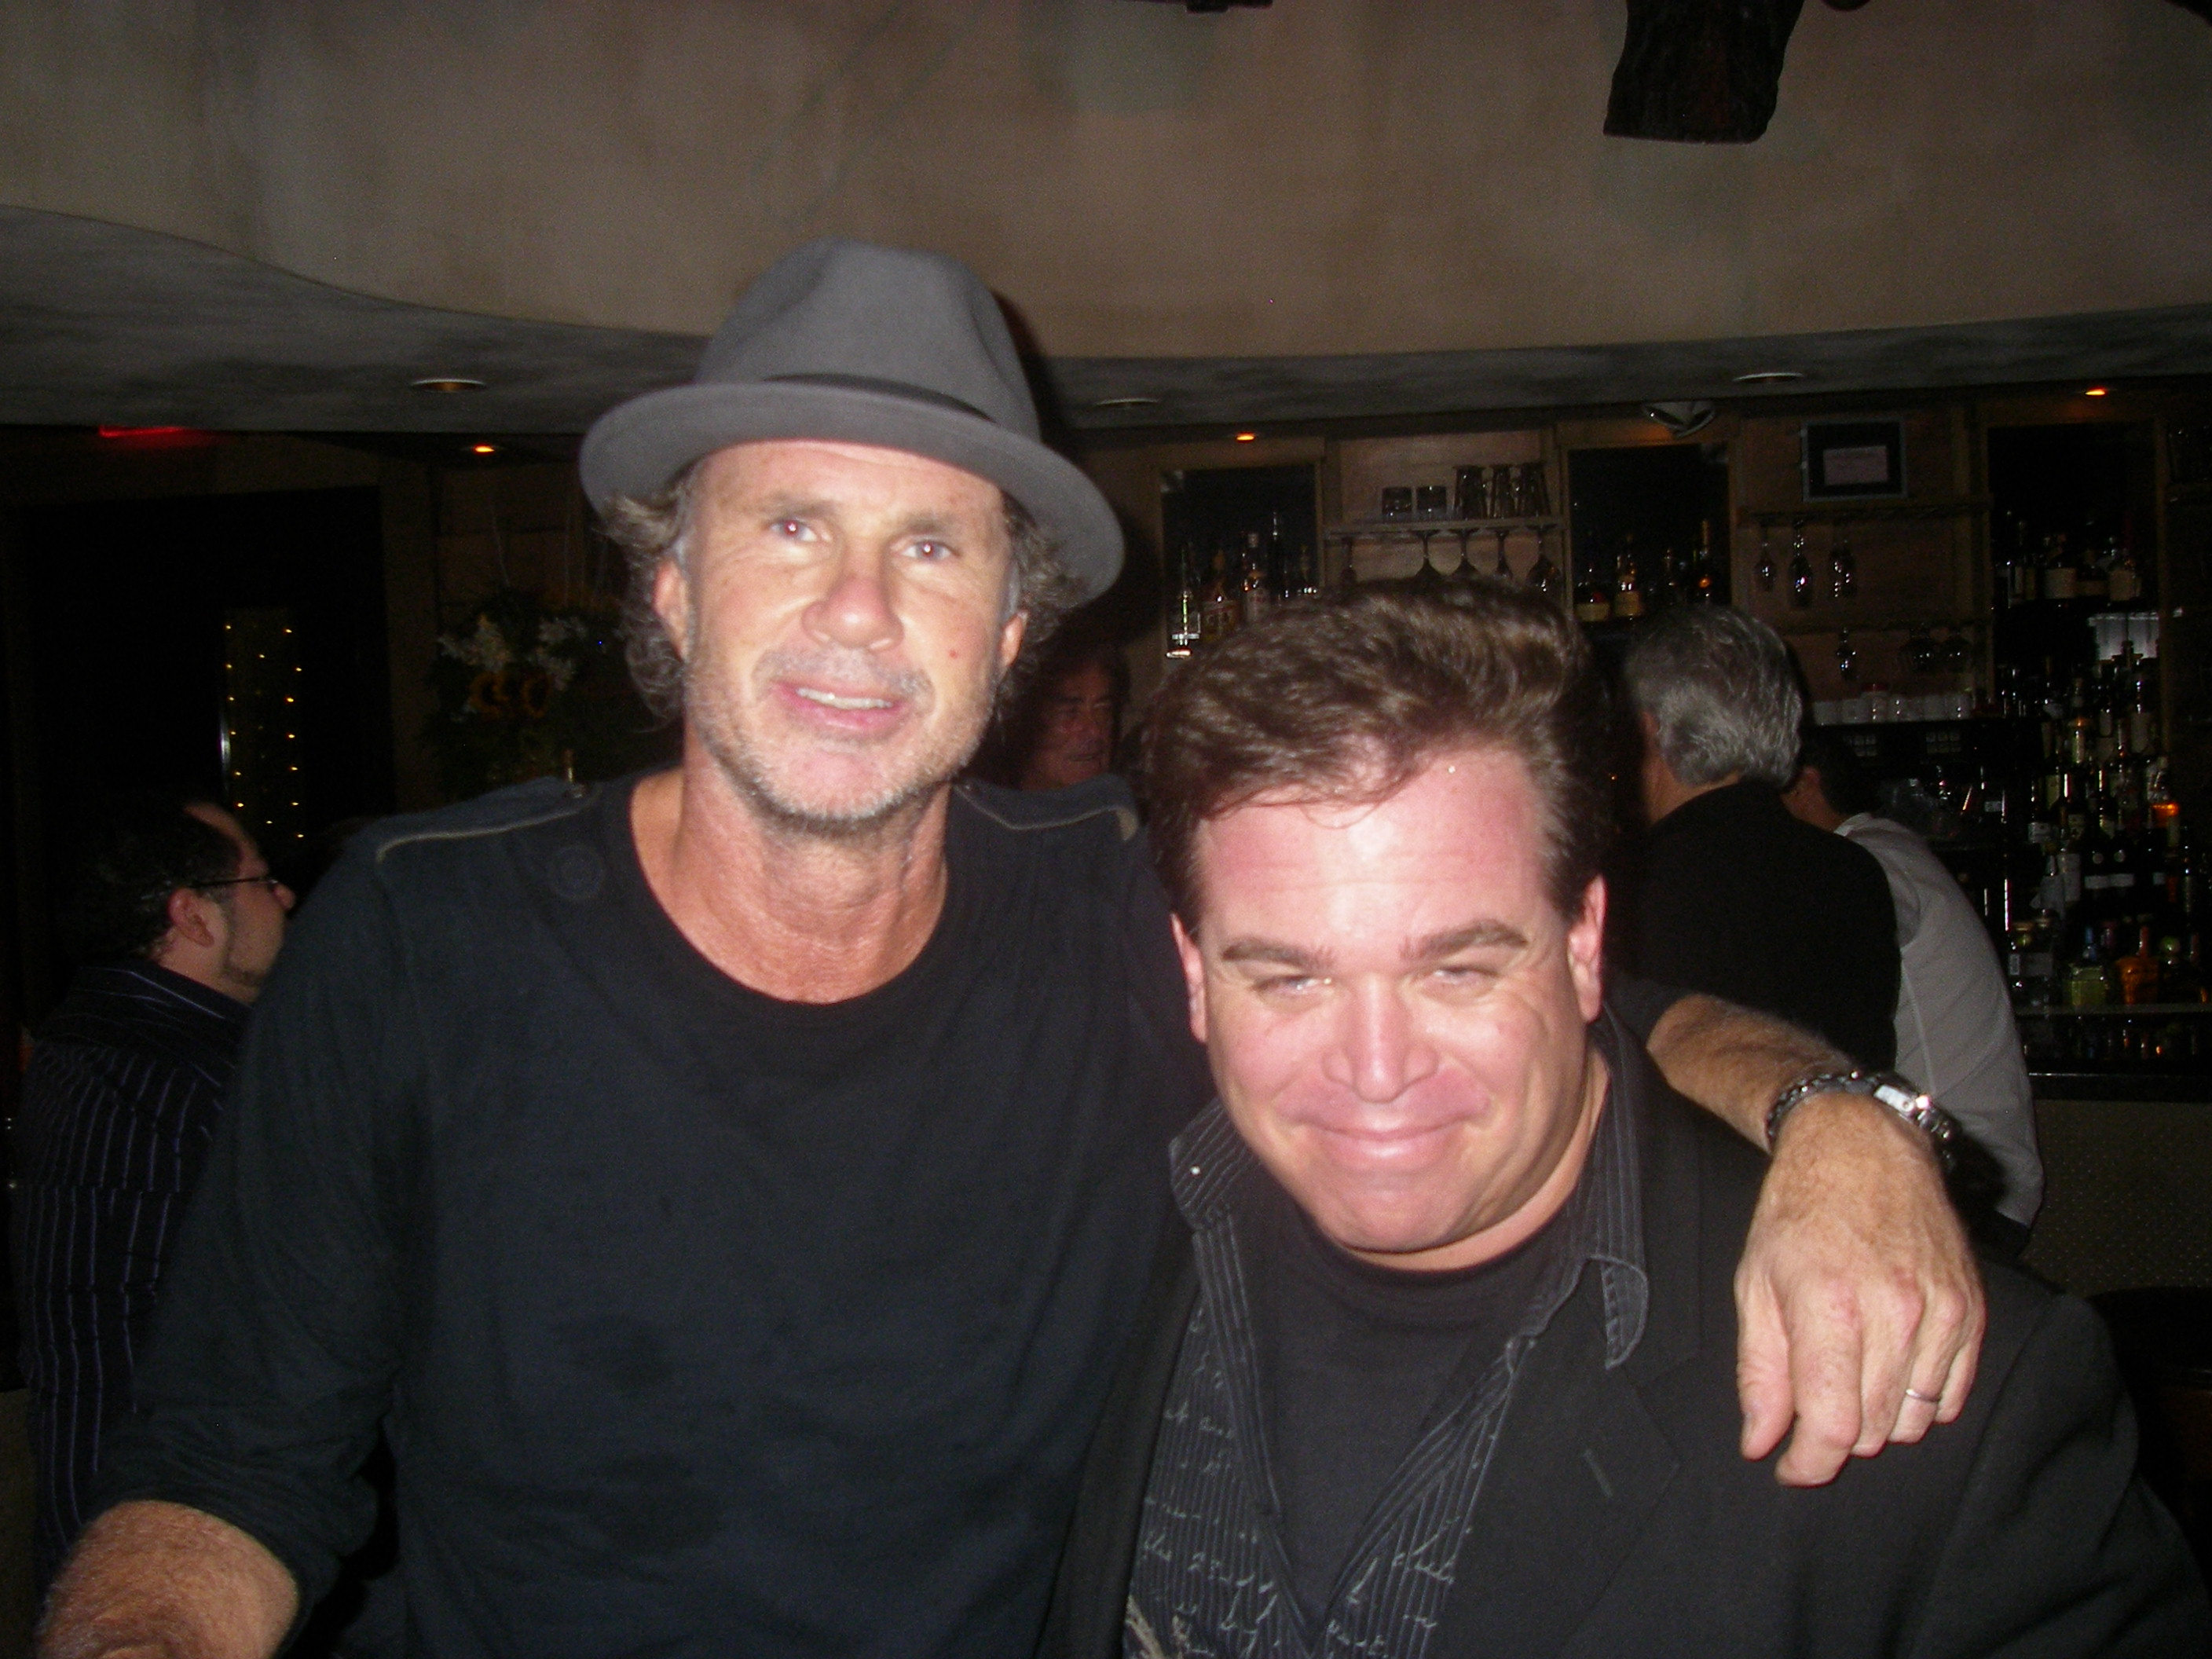 Jim Ervin and Chad Smith